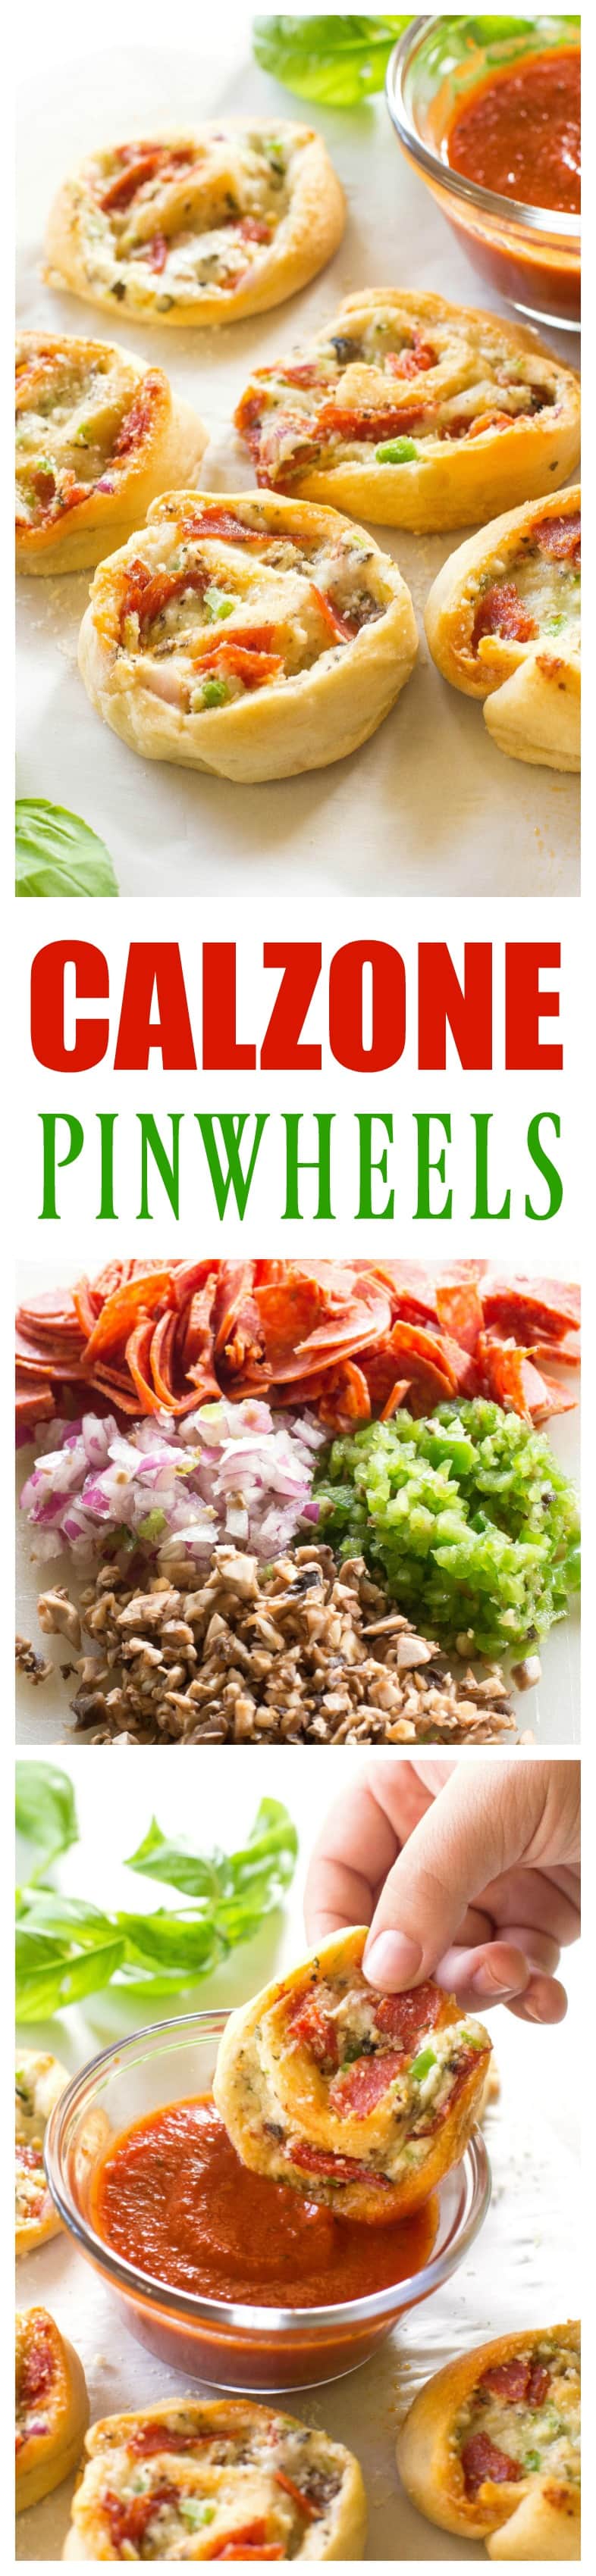 Calzone Pinwheels - pepperoni, mushrooms, onion, and green bell pepper. Guess we should call these Supreme Calzone Pinwheels! #pizza #rolls #calzone #italian #appetizer